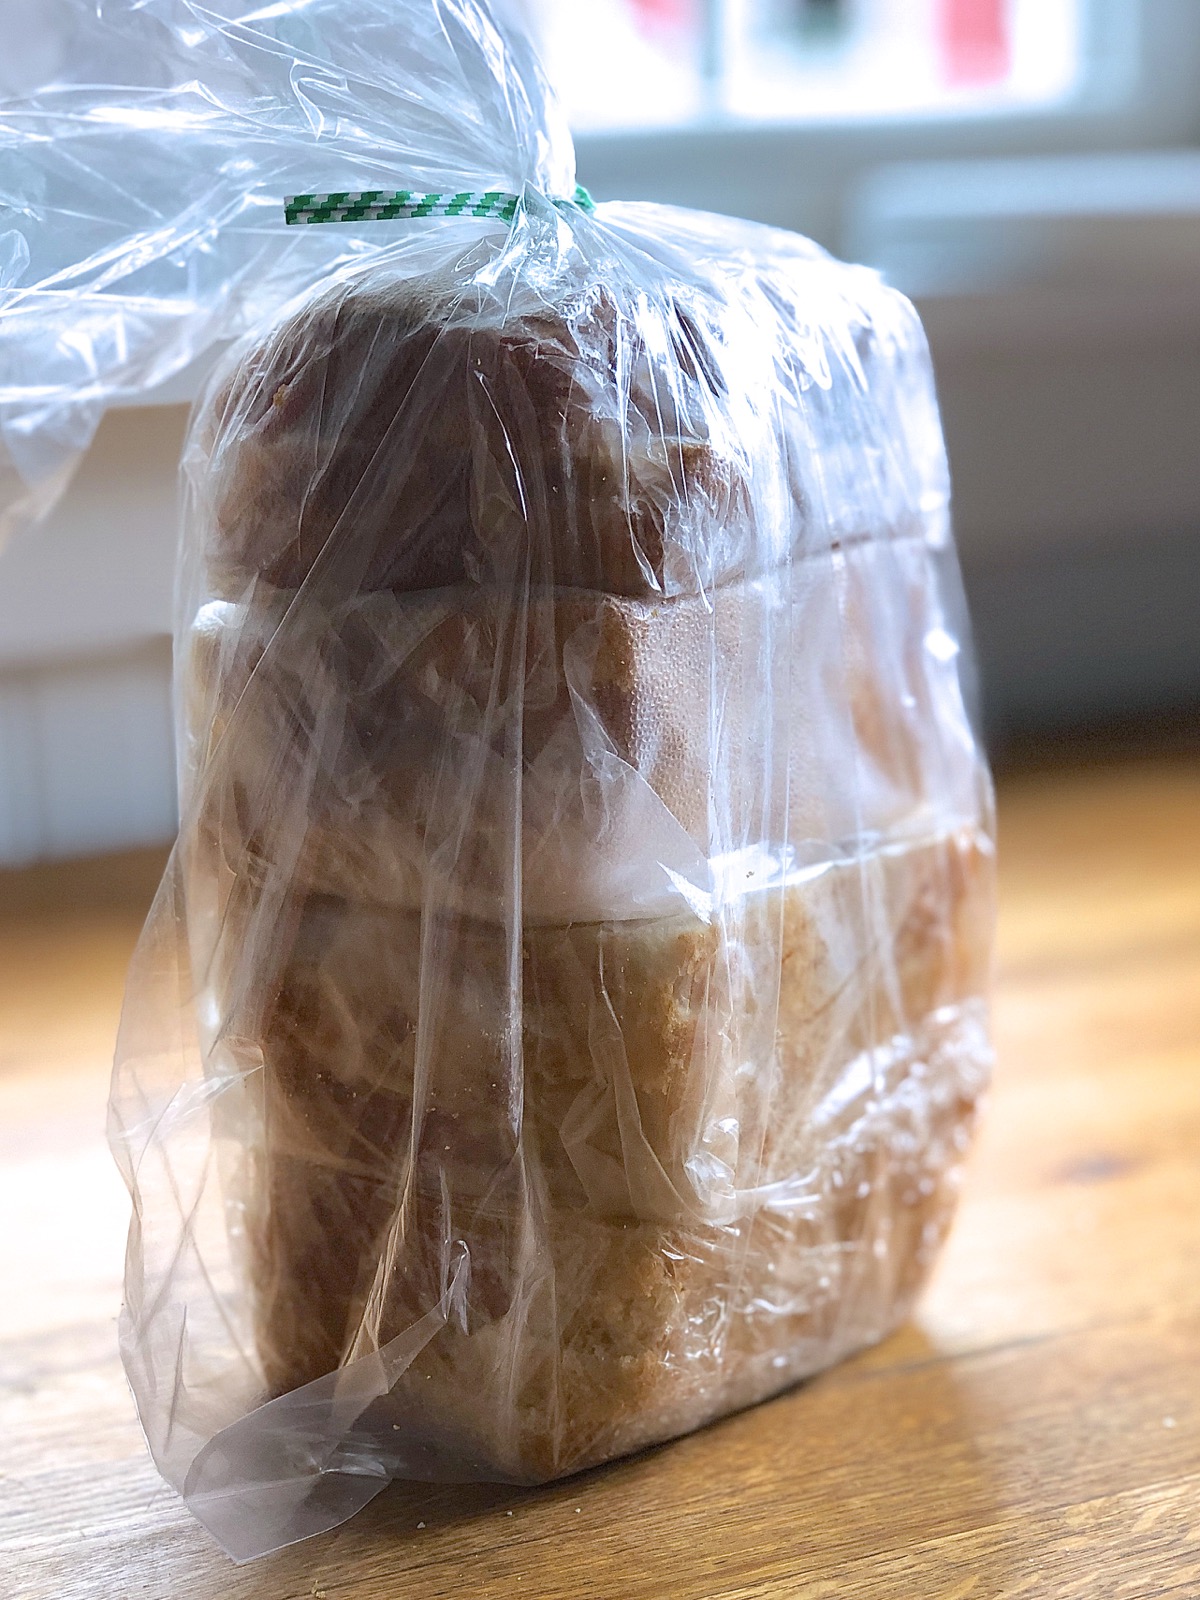 Individual packets of sandwich bread stored in a plastic bag, ready for the freezer.